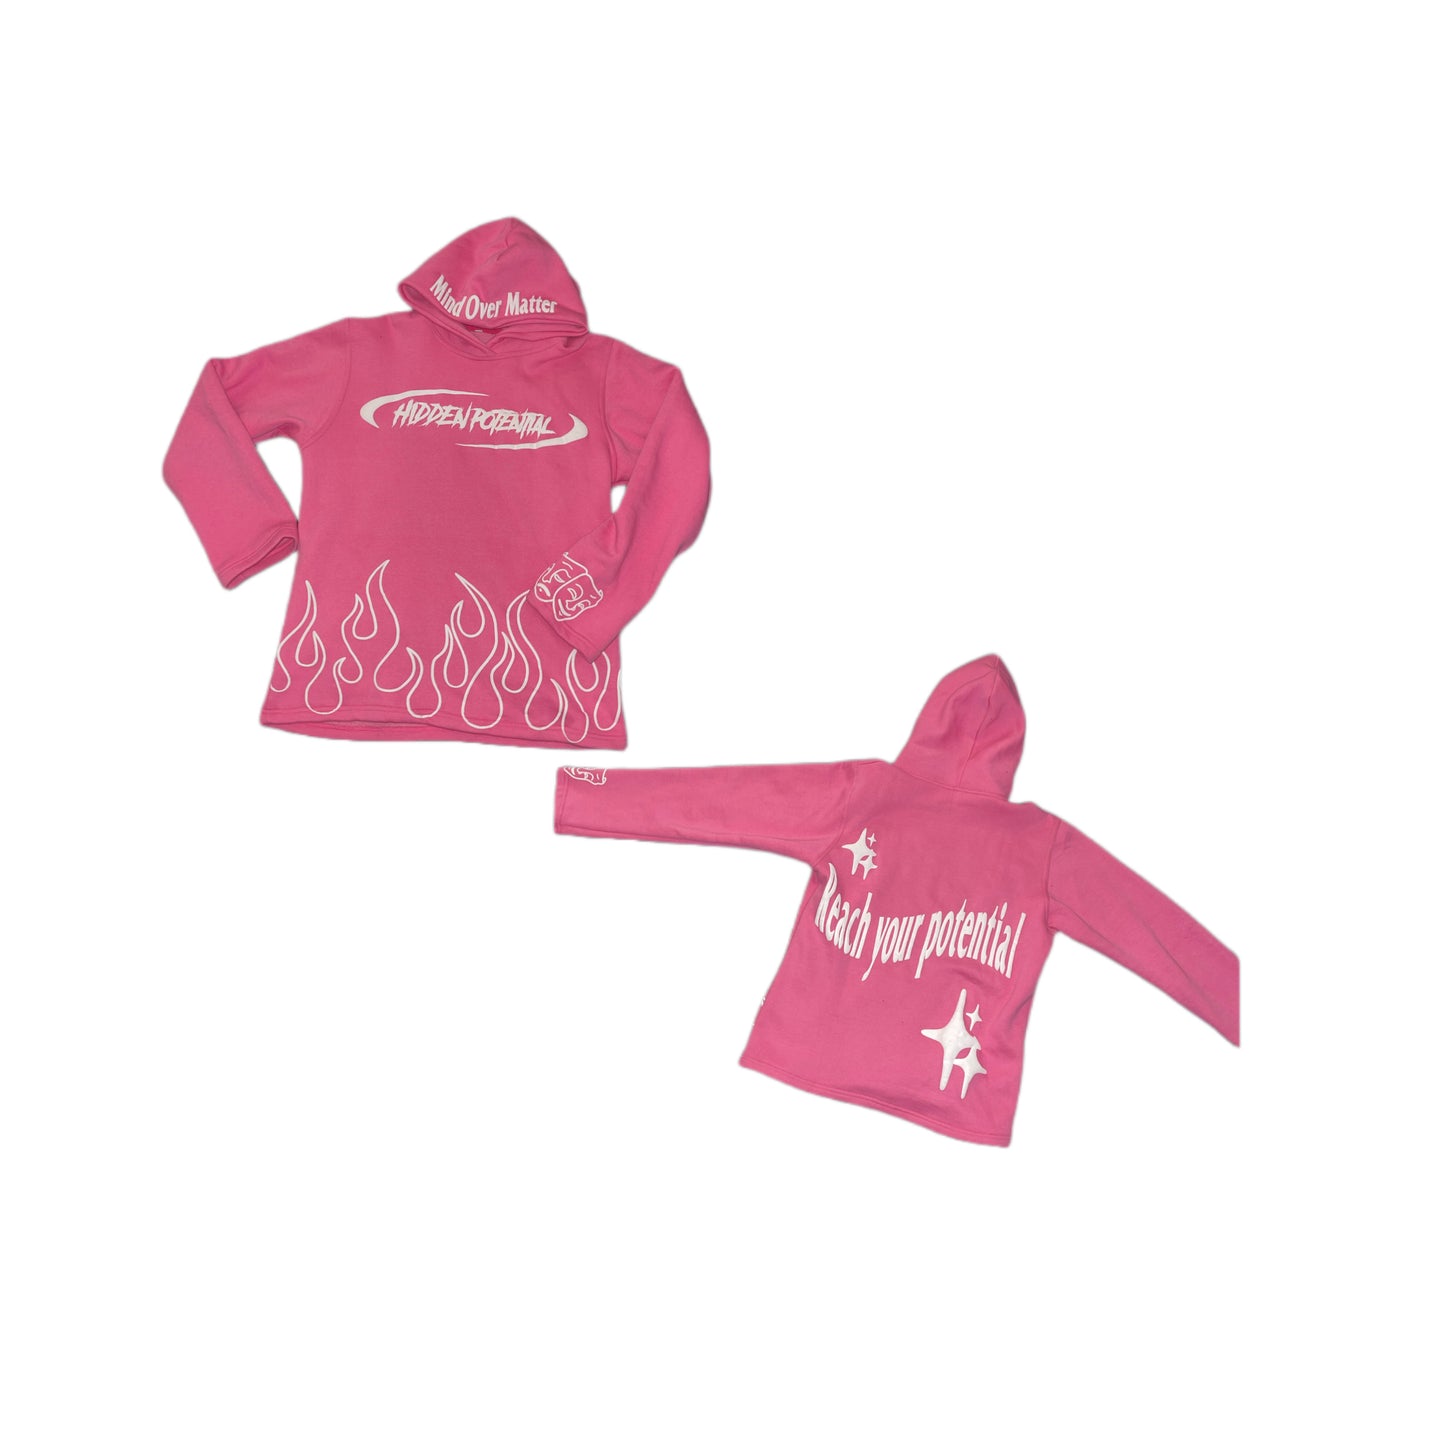 Pink & White "RYP" pullover